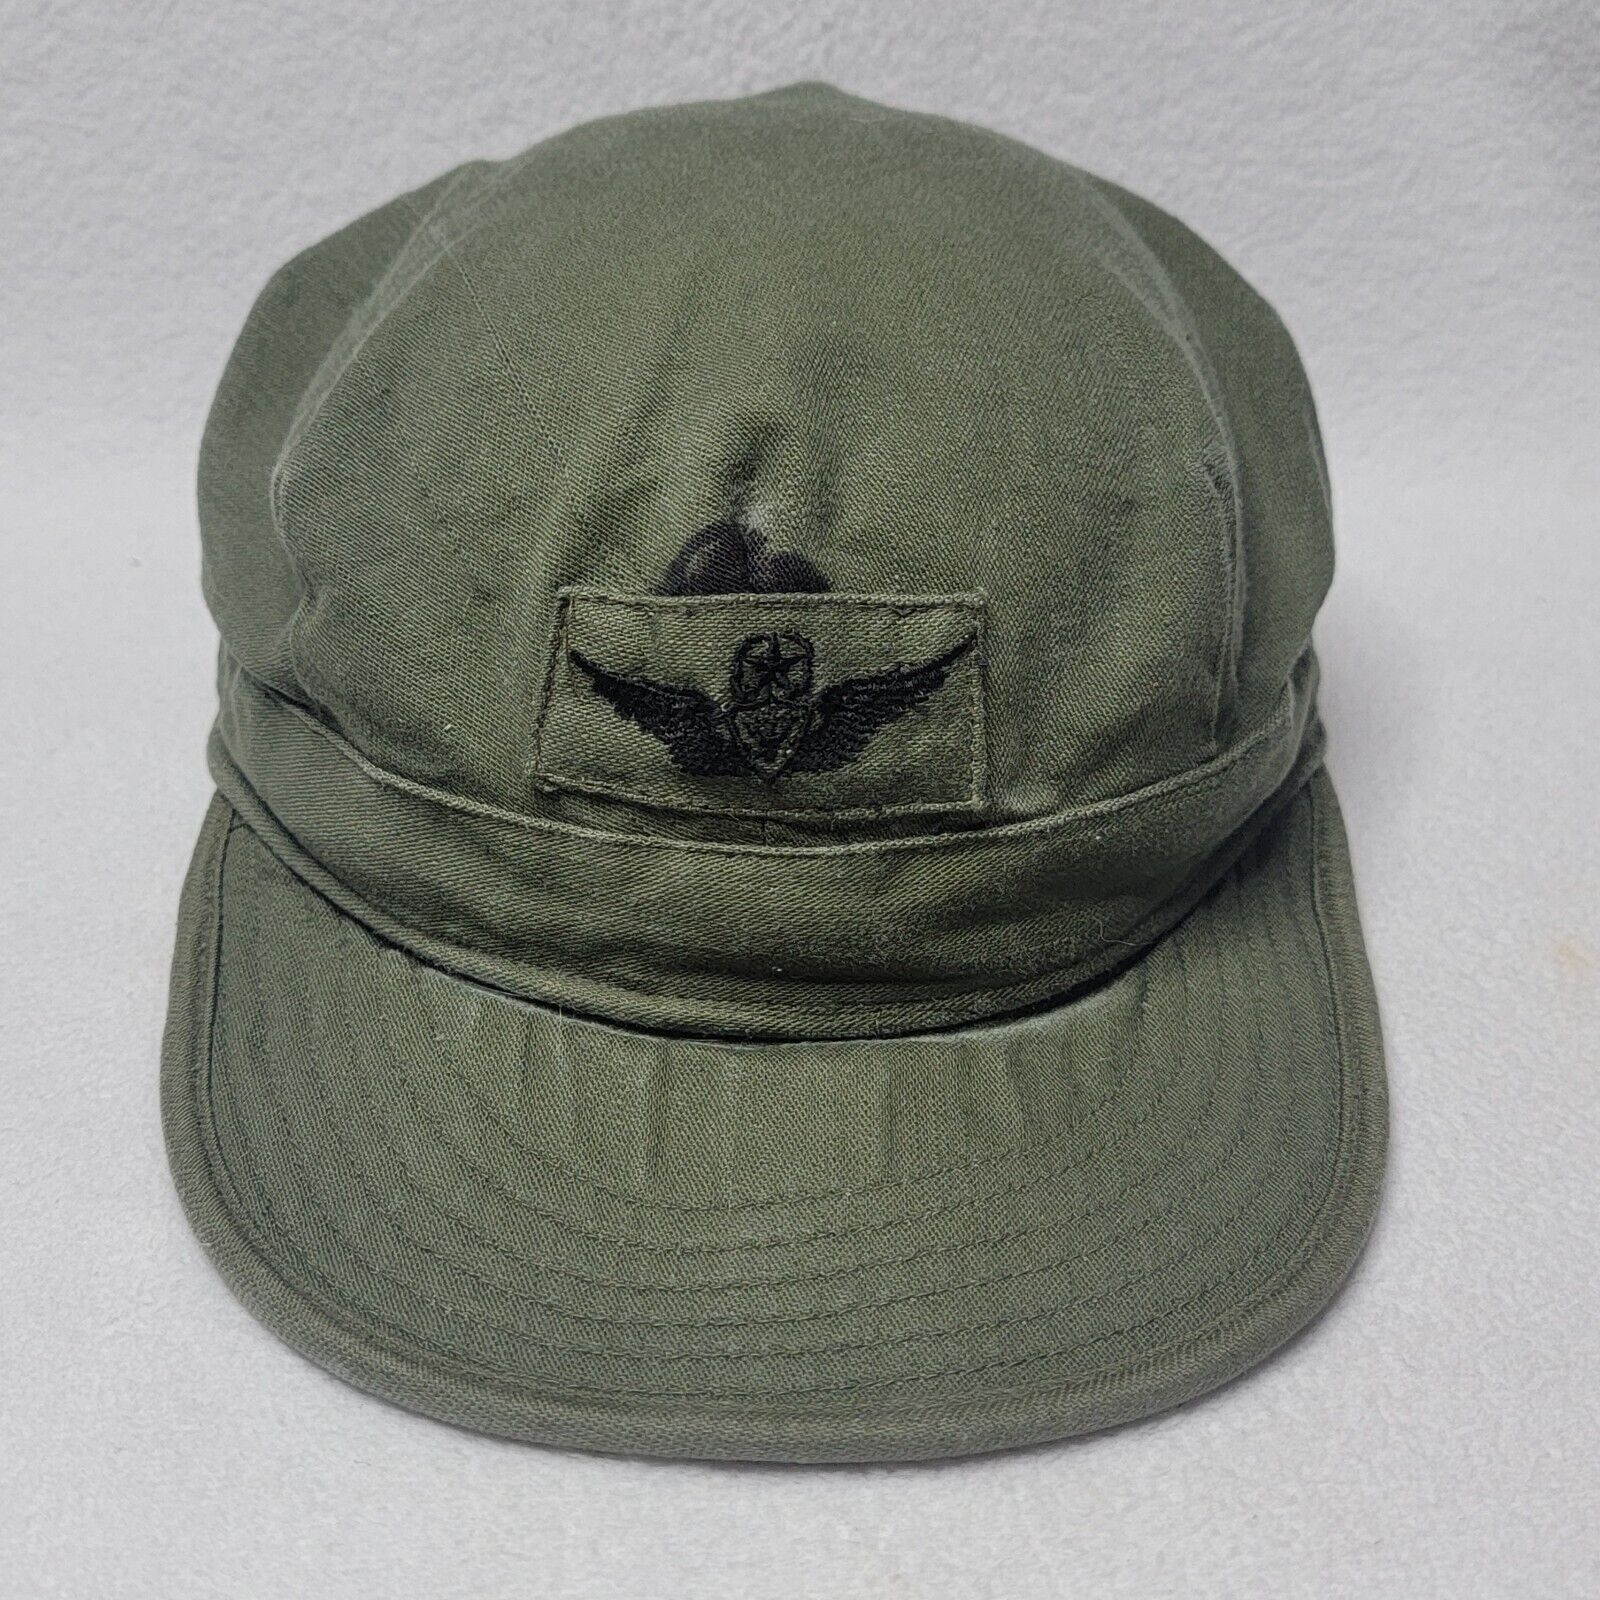 Vintage 1952 Army Master Aviator Military Issued Utility Field Cap Green Faded